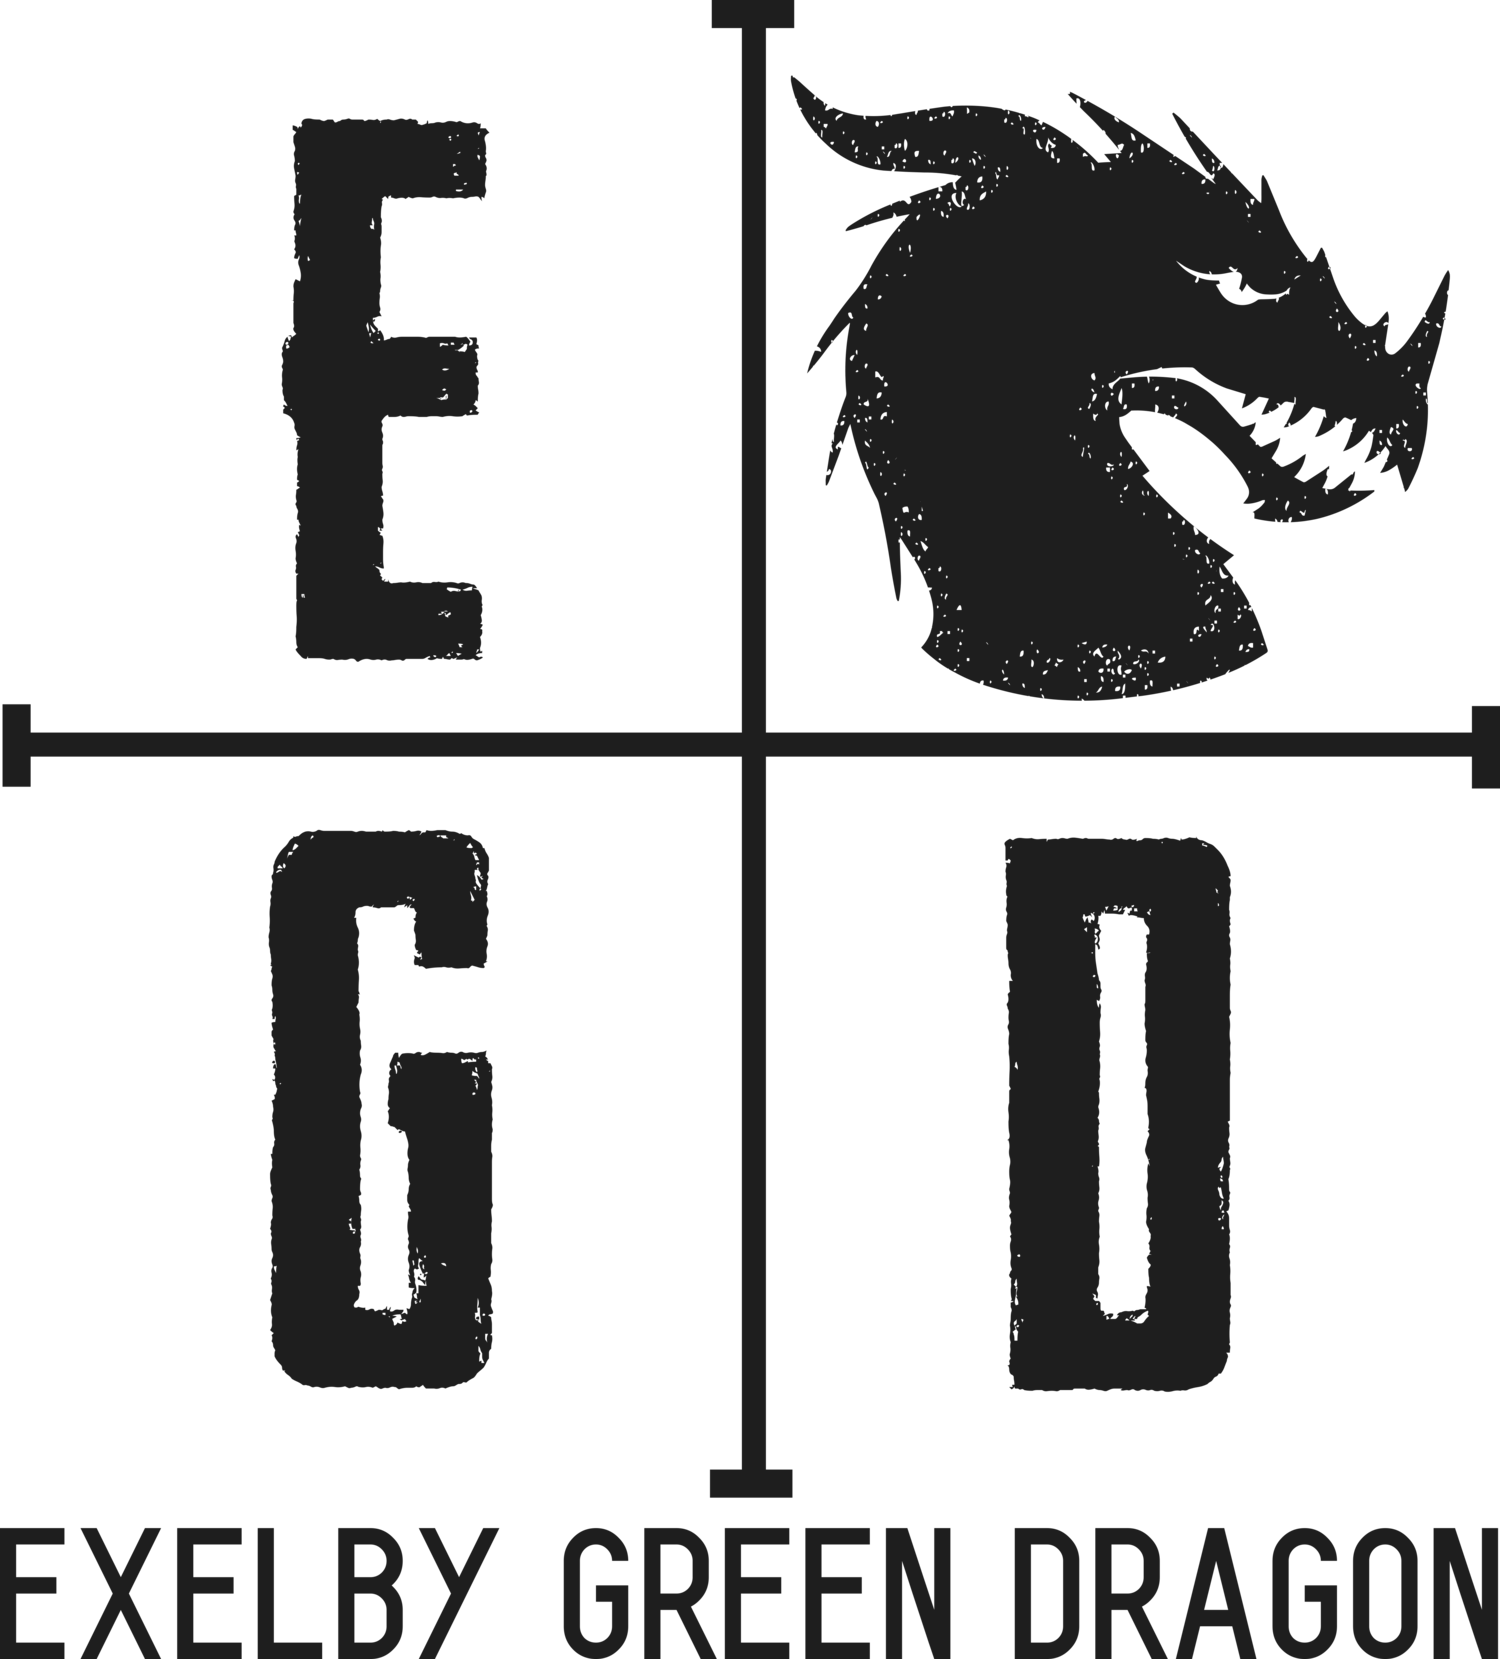 EXELBY GREEN DRAGON